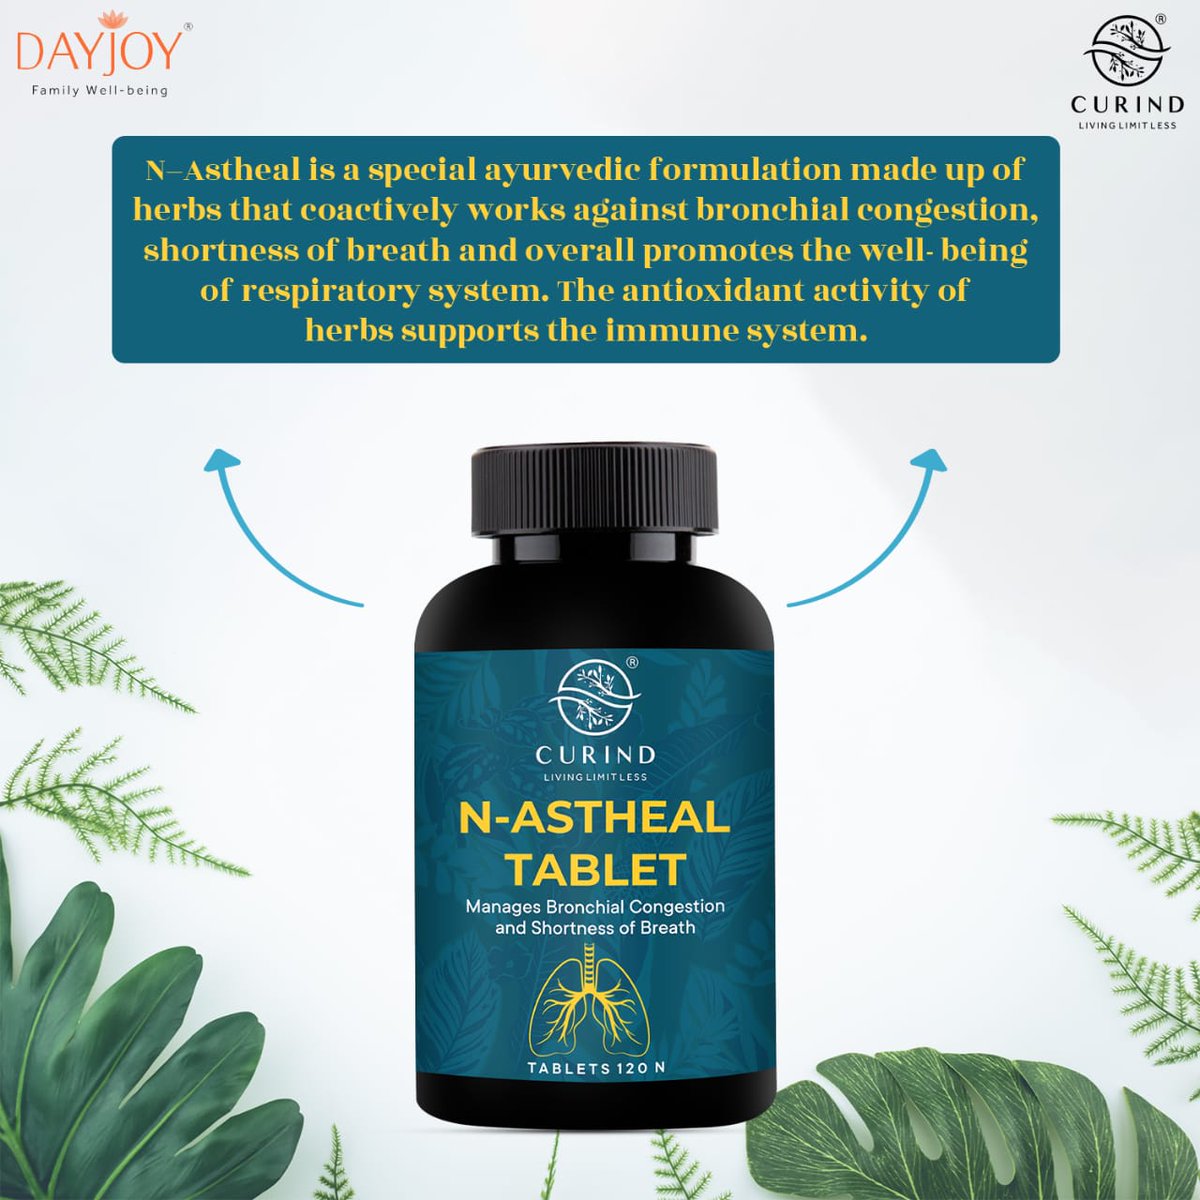 Today’s time calls for a substantial step towards elevating your health. N-Astheal Tablet is your one-stop solution to maintain an optimum respiratory system. 

Get your pack today & indulge in a healthy lifestyle!

#dayjoy #dayjoywellness  #energy #feelgood #lookgood https://t.co/9LIsEE0rJI